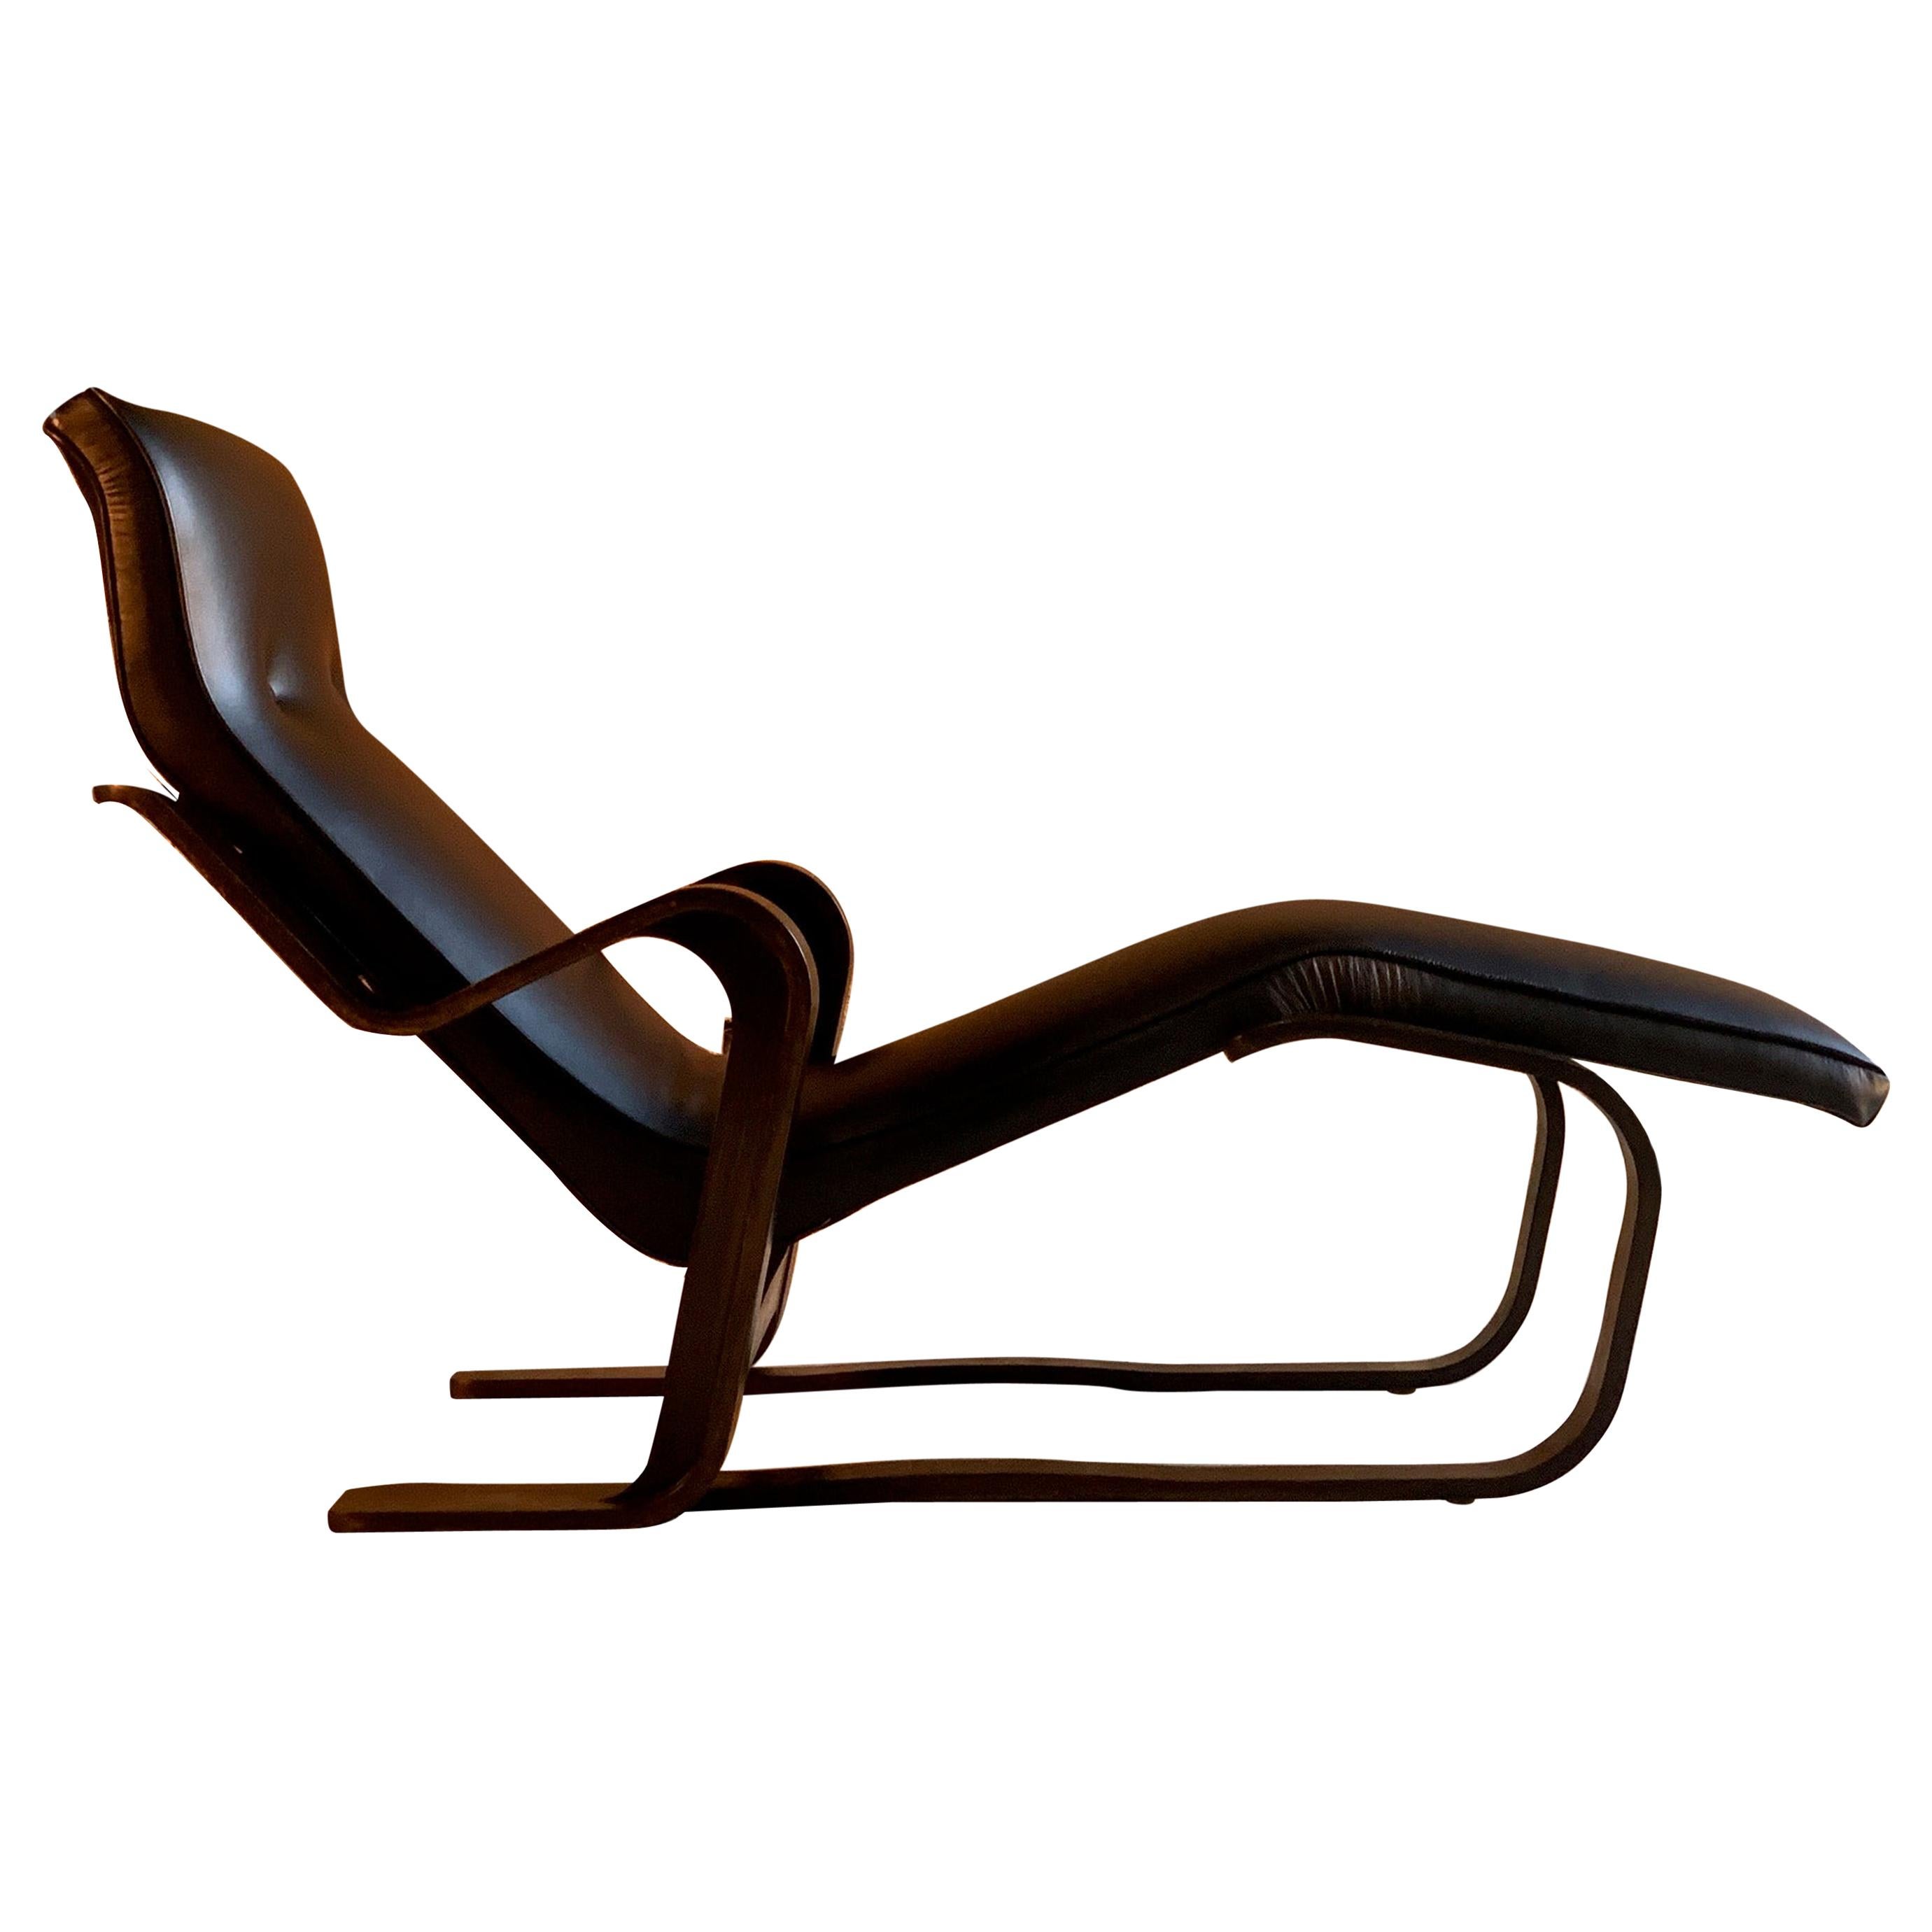 Marcel Breuer Long Chair Chaise Lounge Attr. to Isokon, c 1970 Bauhaus  Midcent at 1stDibs | isokon chair, marcel breuer chaise lounge, chaise  marcel